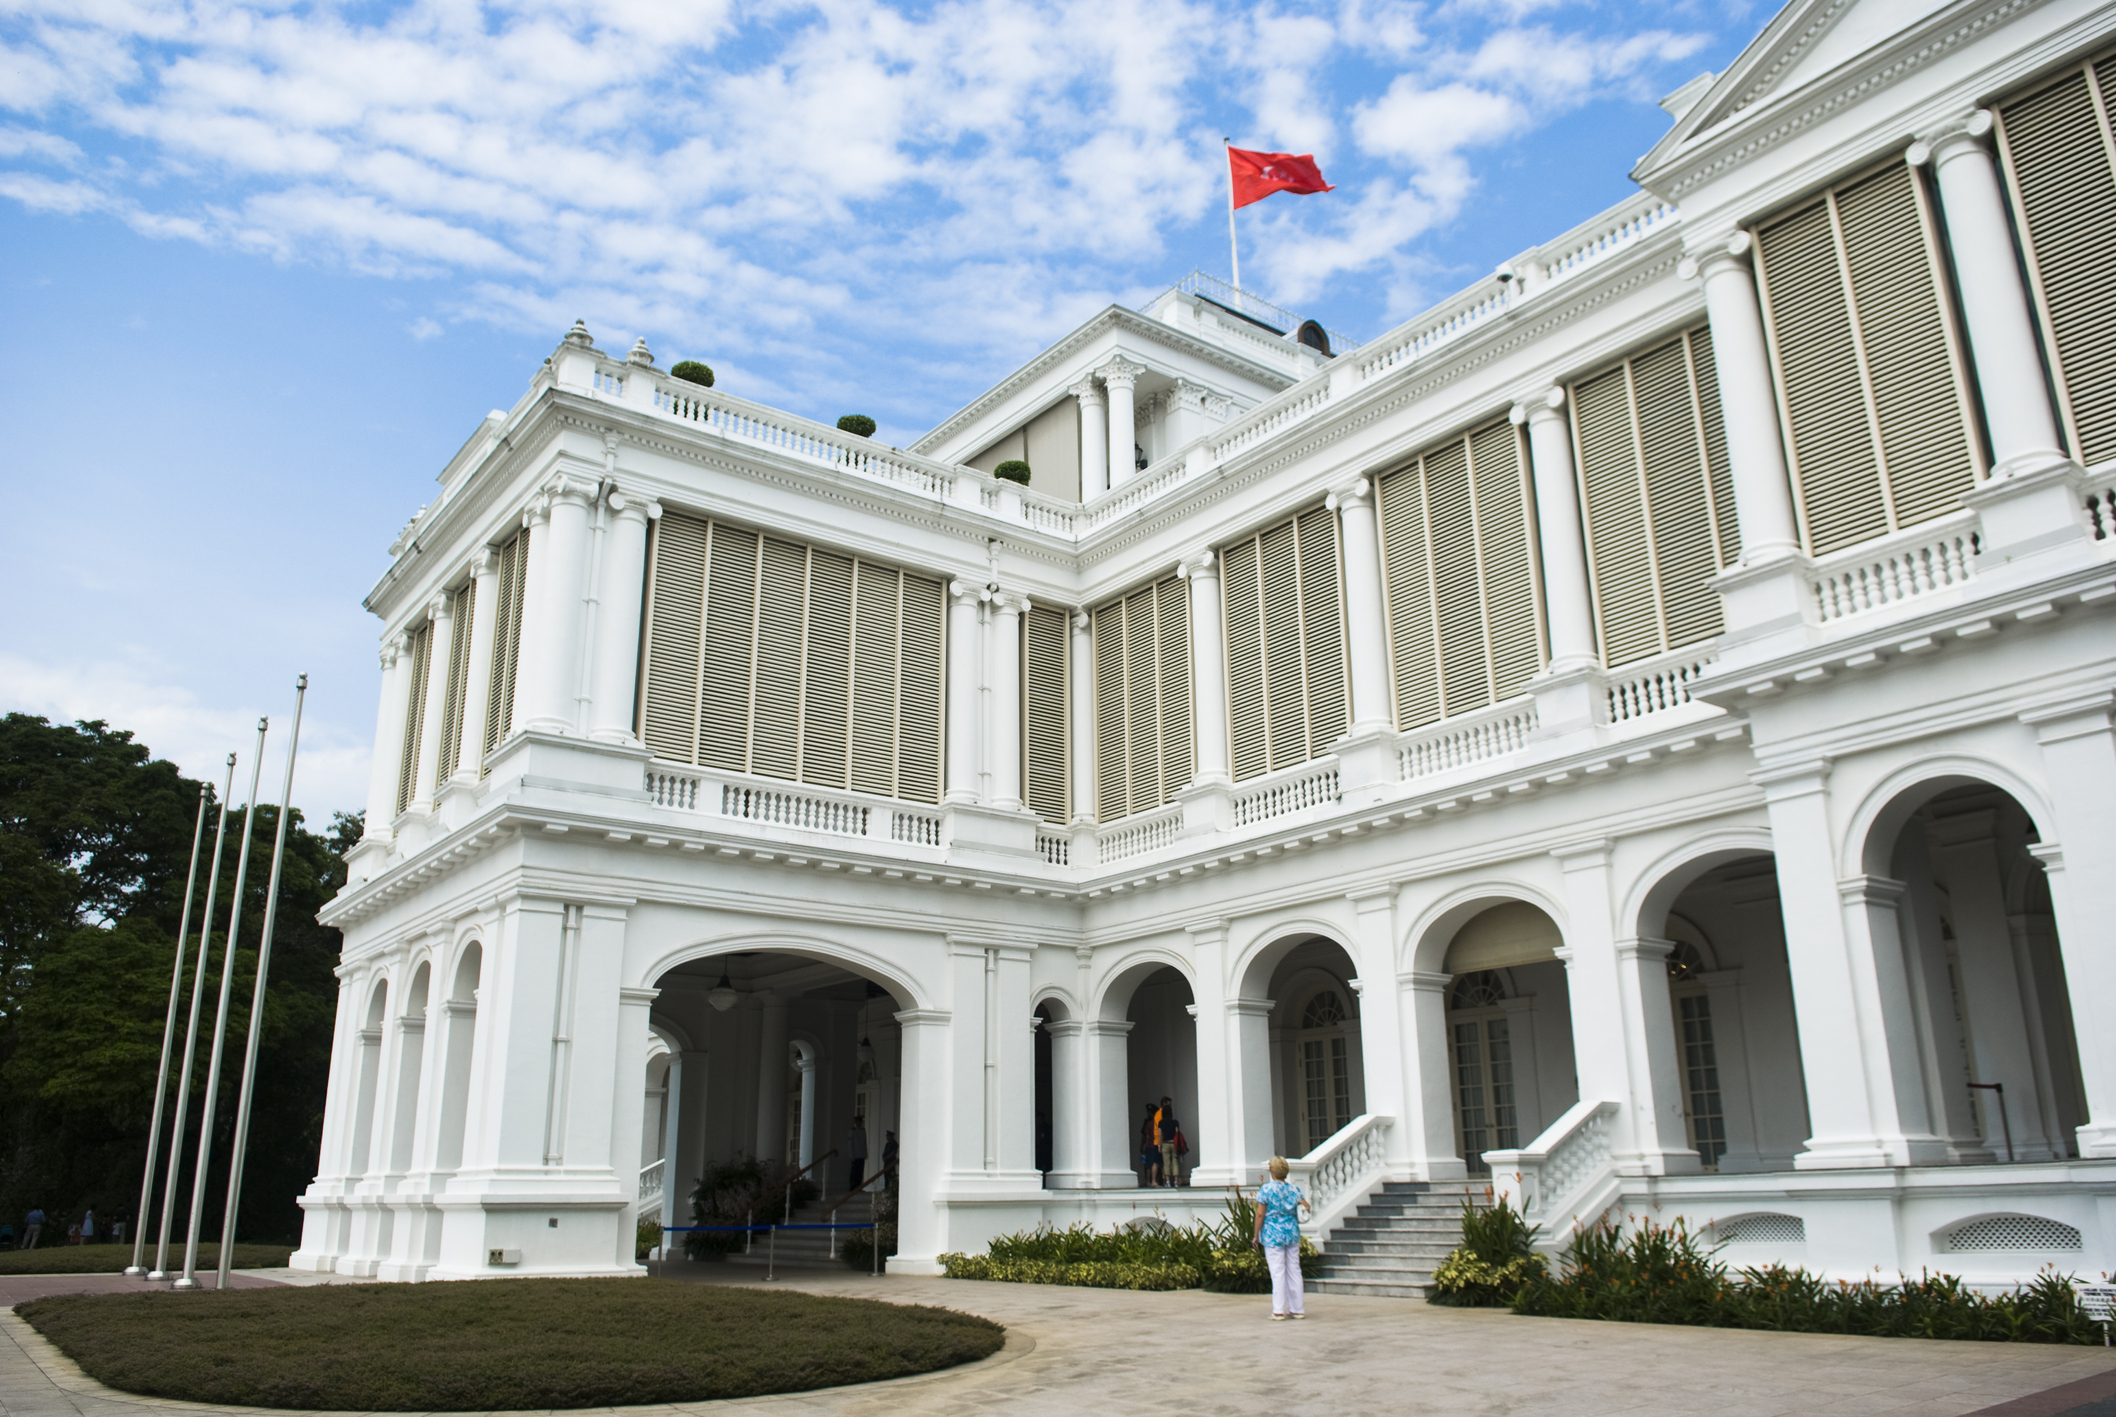 The main building of the Istana, the official residence of the President of Singapore. (Getty Images/iStock)